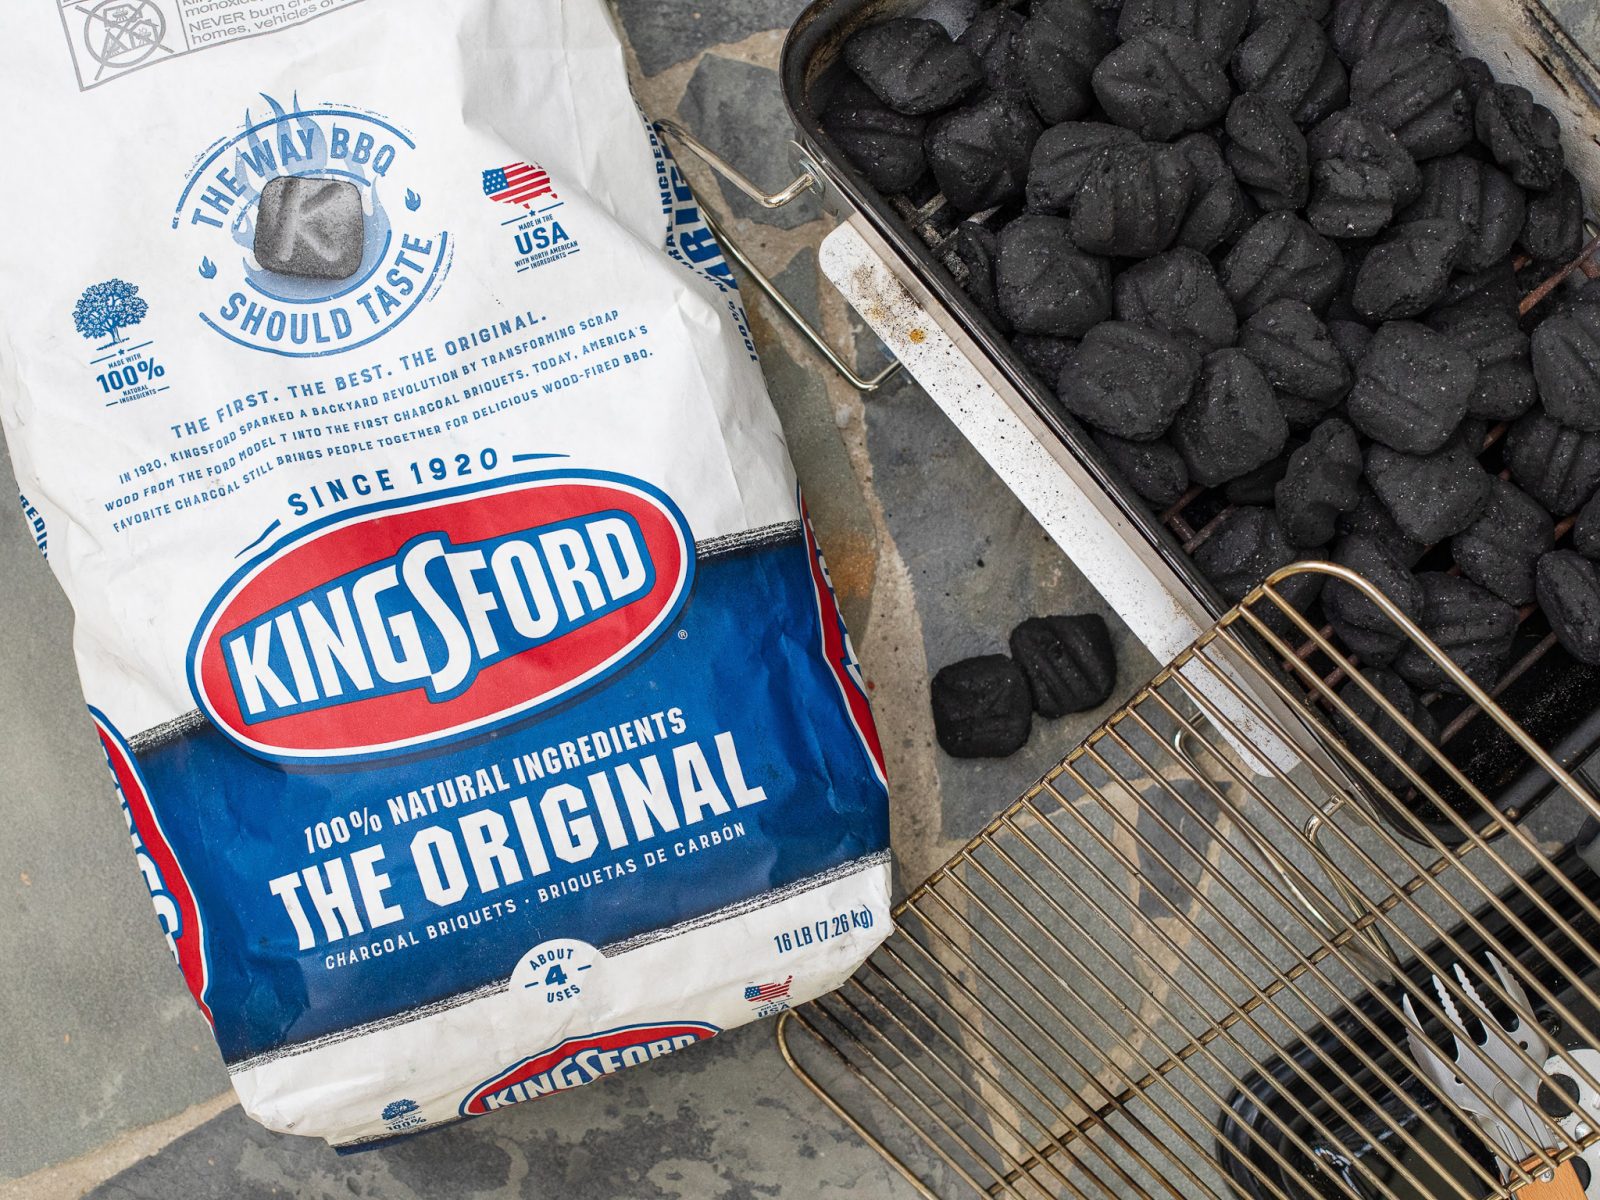 Kingsford Charcoal As Low As $7.99 At Kroger (Regular Price $11.99)